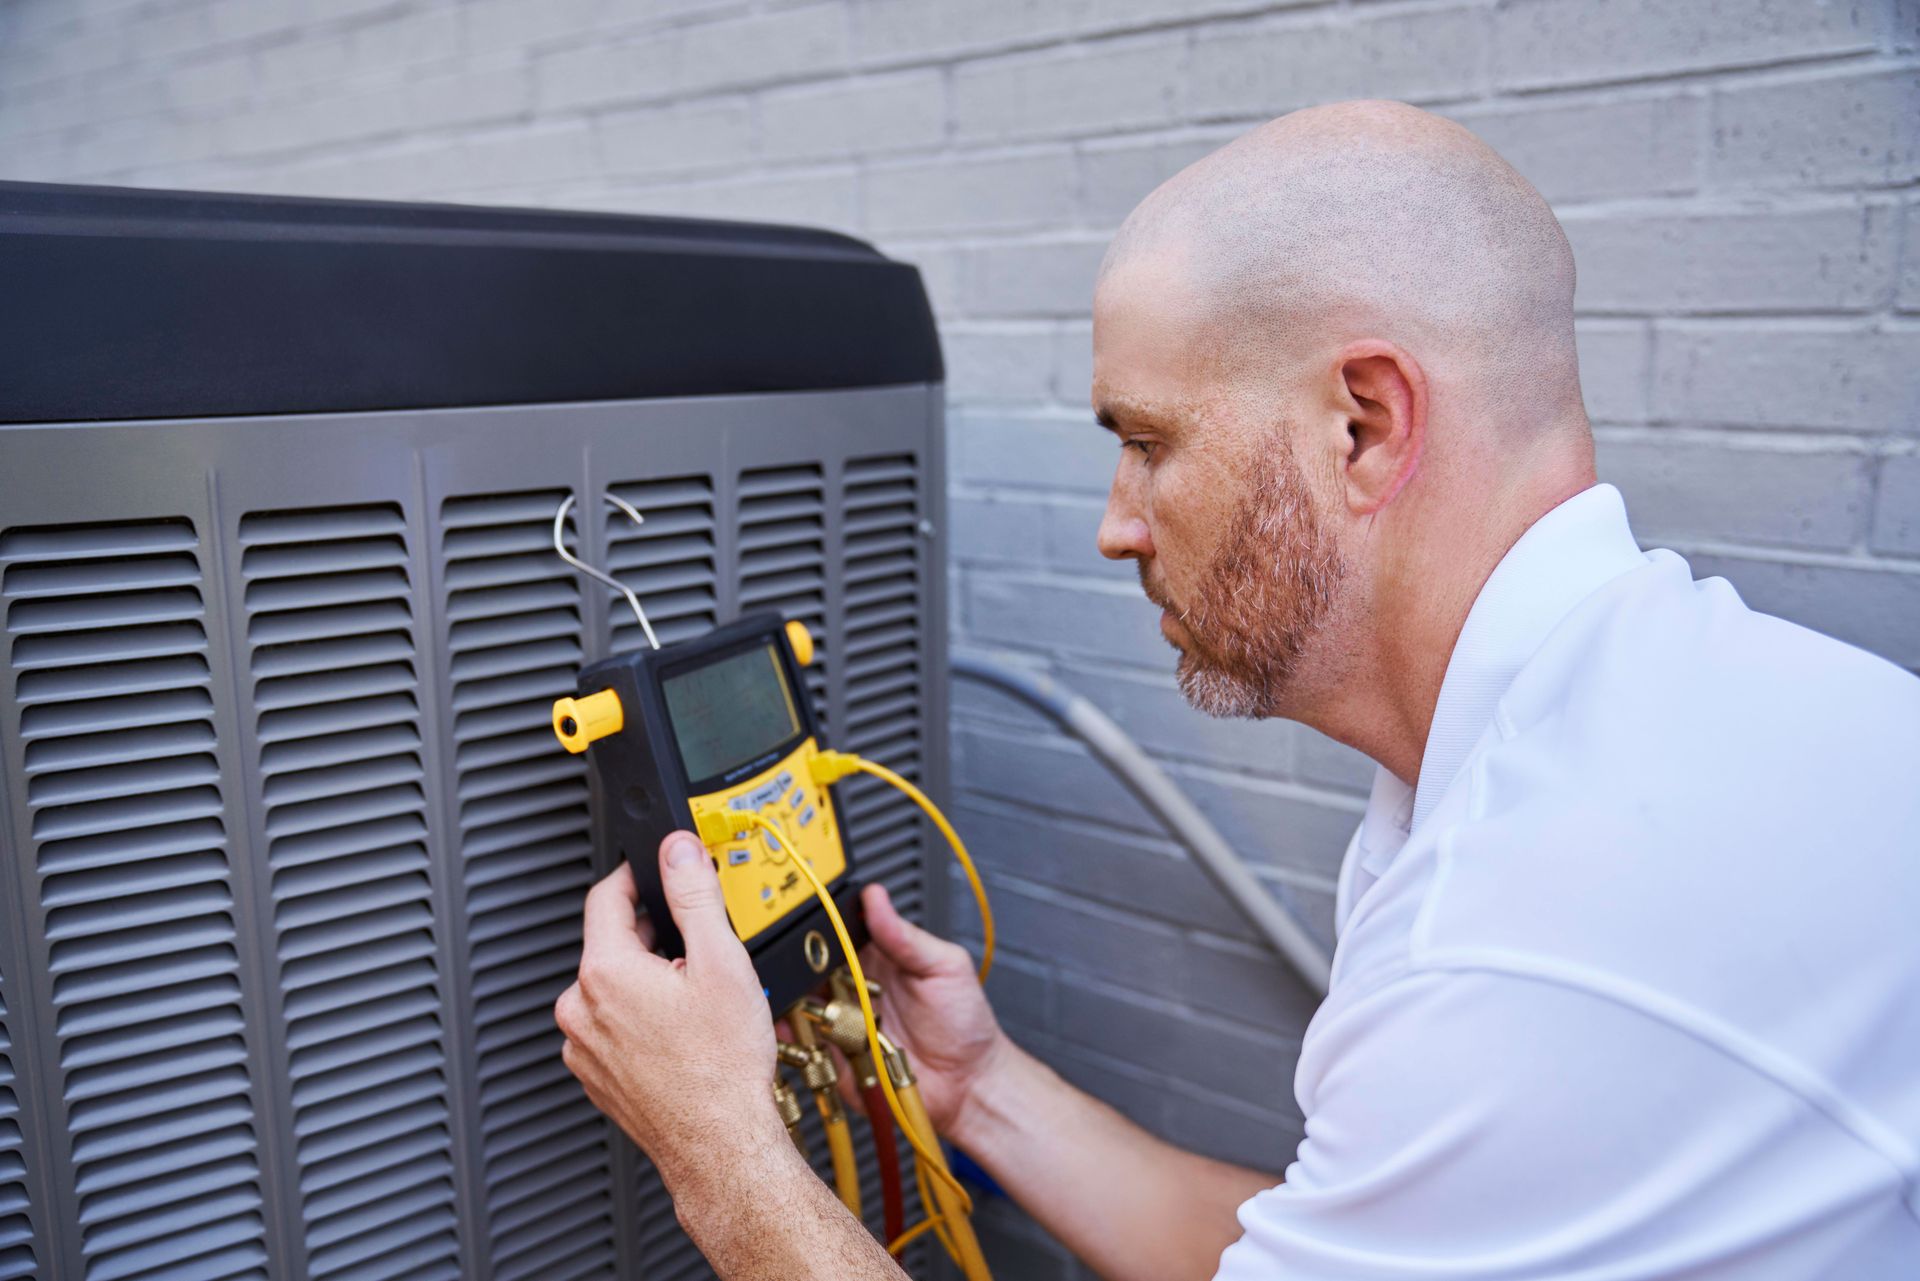 Up close of a service technician looking at his tool while running diagnostics on an air conditioner.